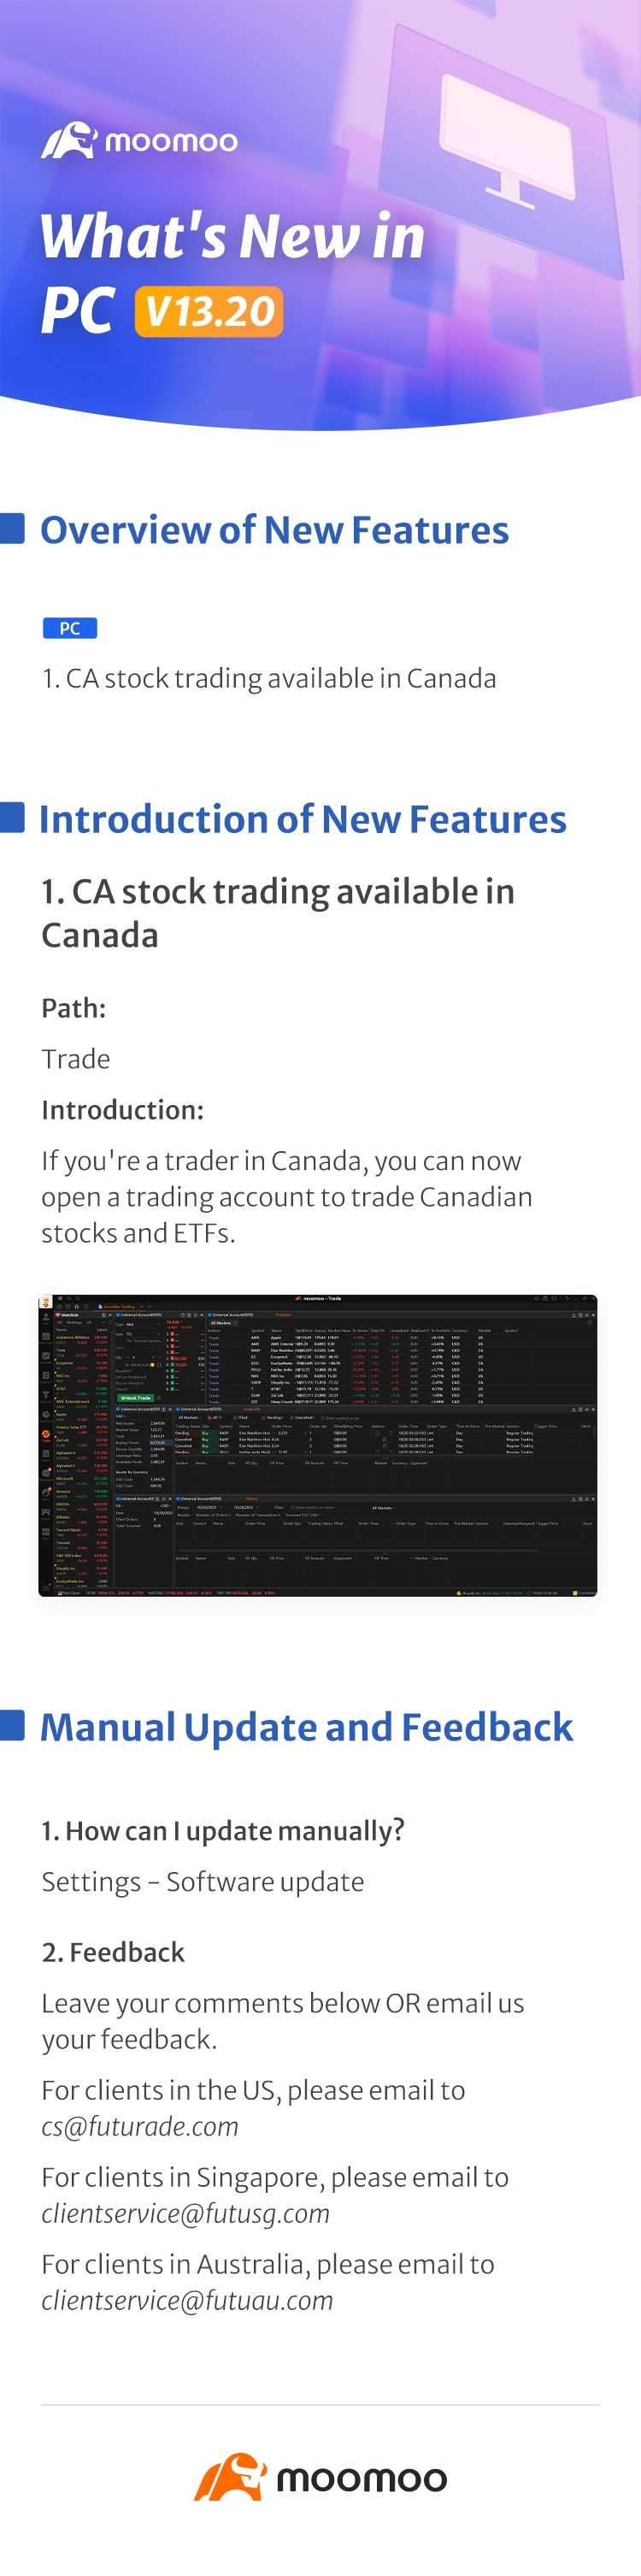 What's New: CA stock trading available in Canada in PC 13.20